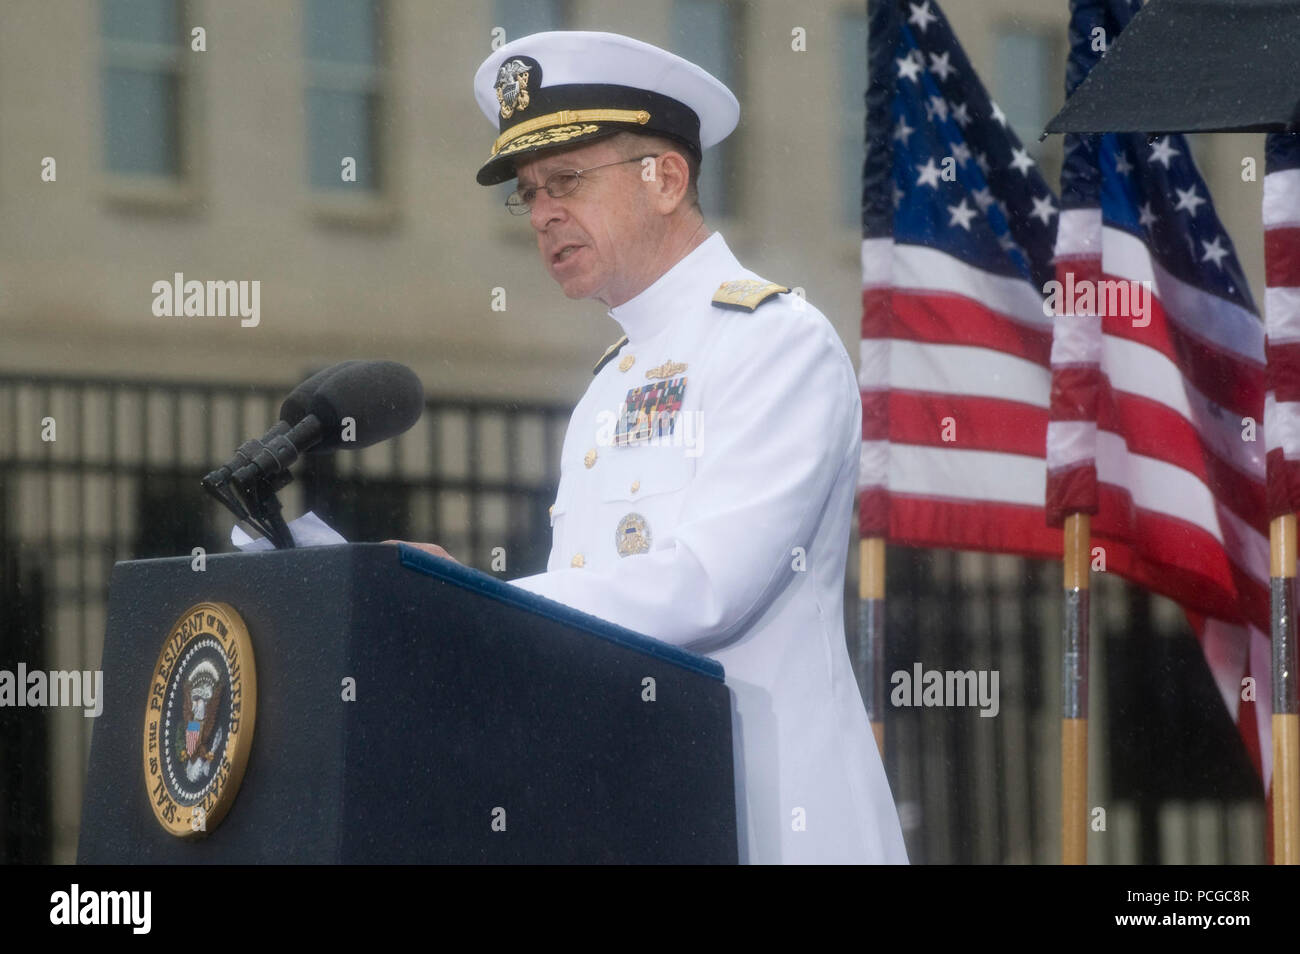 Chairman of the Joint Chiefs of Staff Navy Adm. Mike Mullen speaks during a remembrance event at the Pentagon Memorial Sept. 11, 2009. The event included a wreath-laying and was held to honor the memory of those killed in the 2001 terrorist attack. ( Stock Photo